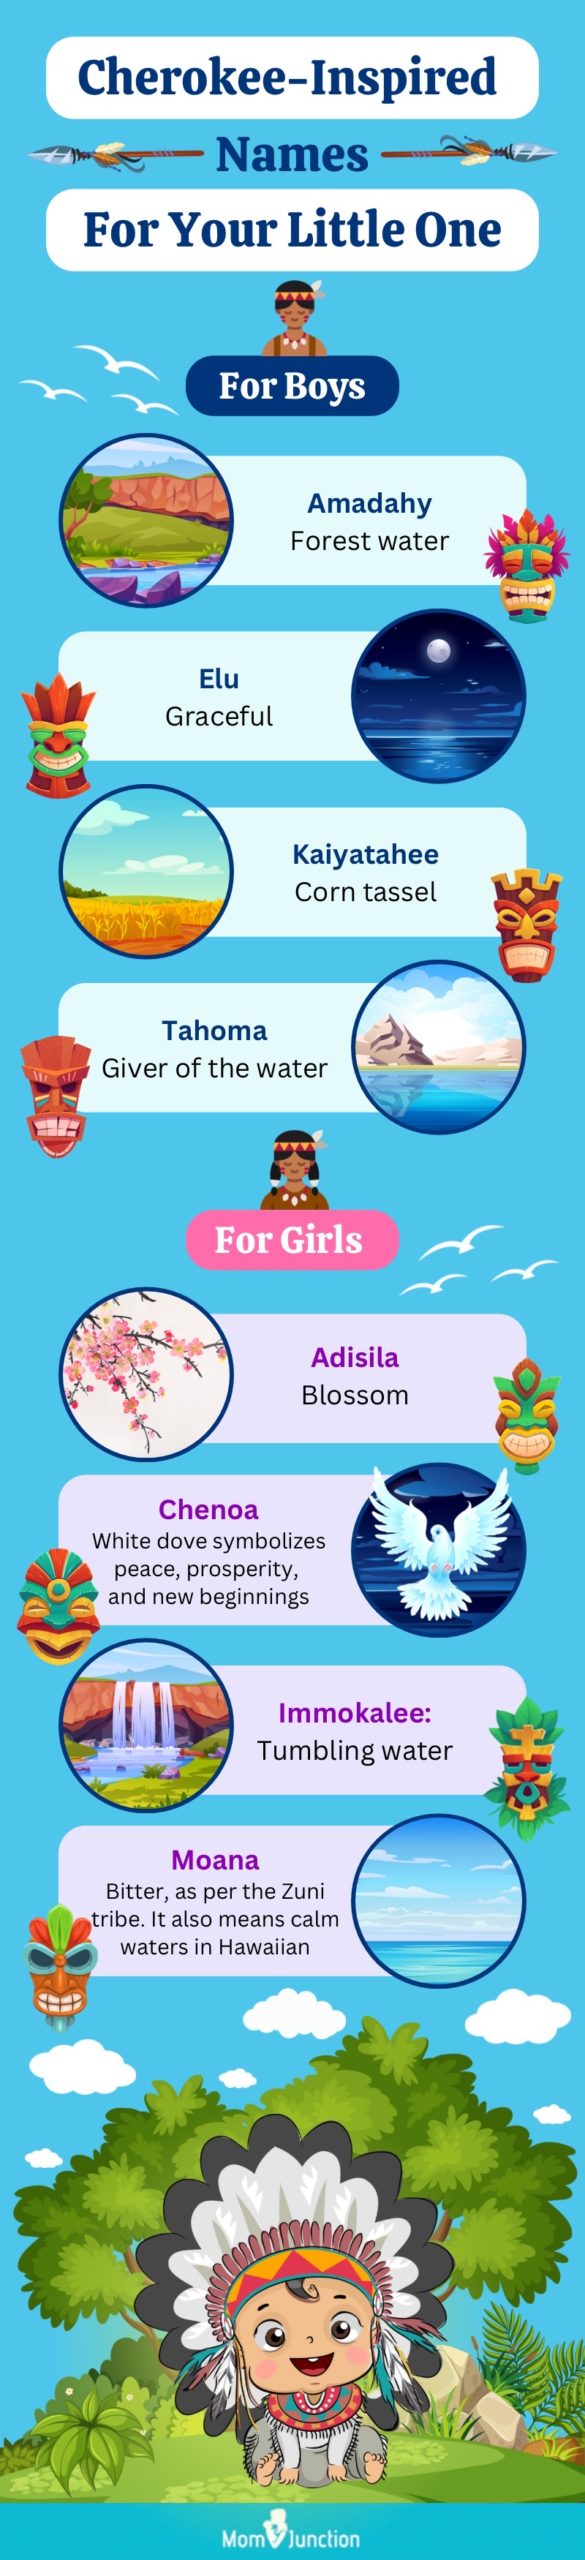 cherokee Names for baby girls and boys [infographic]